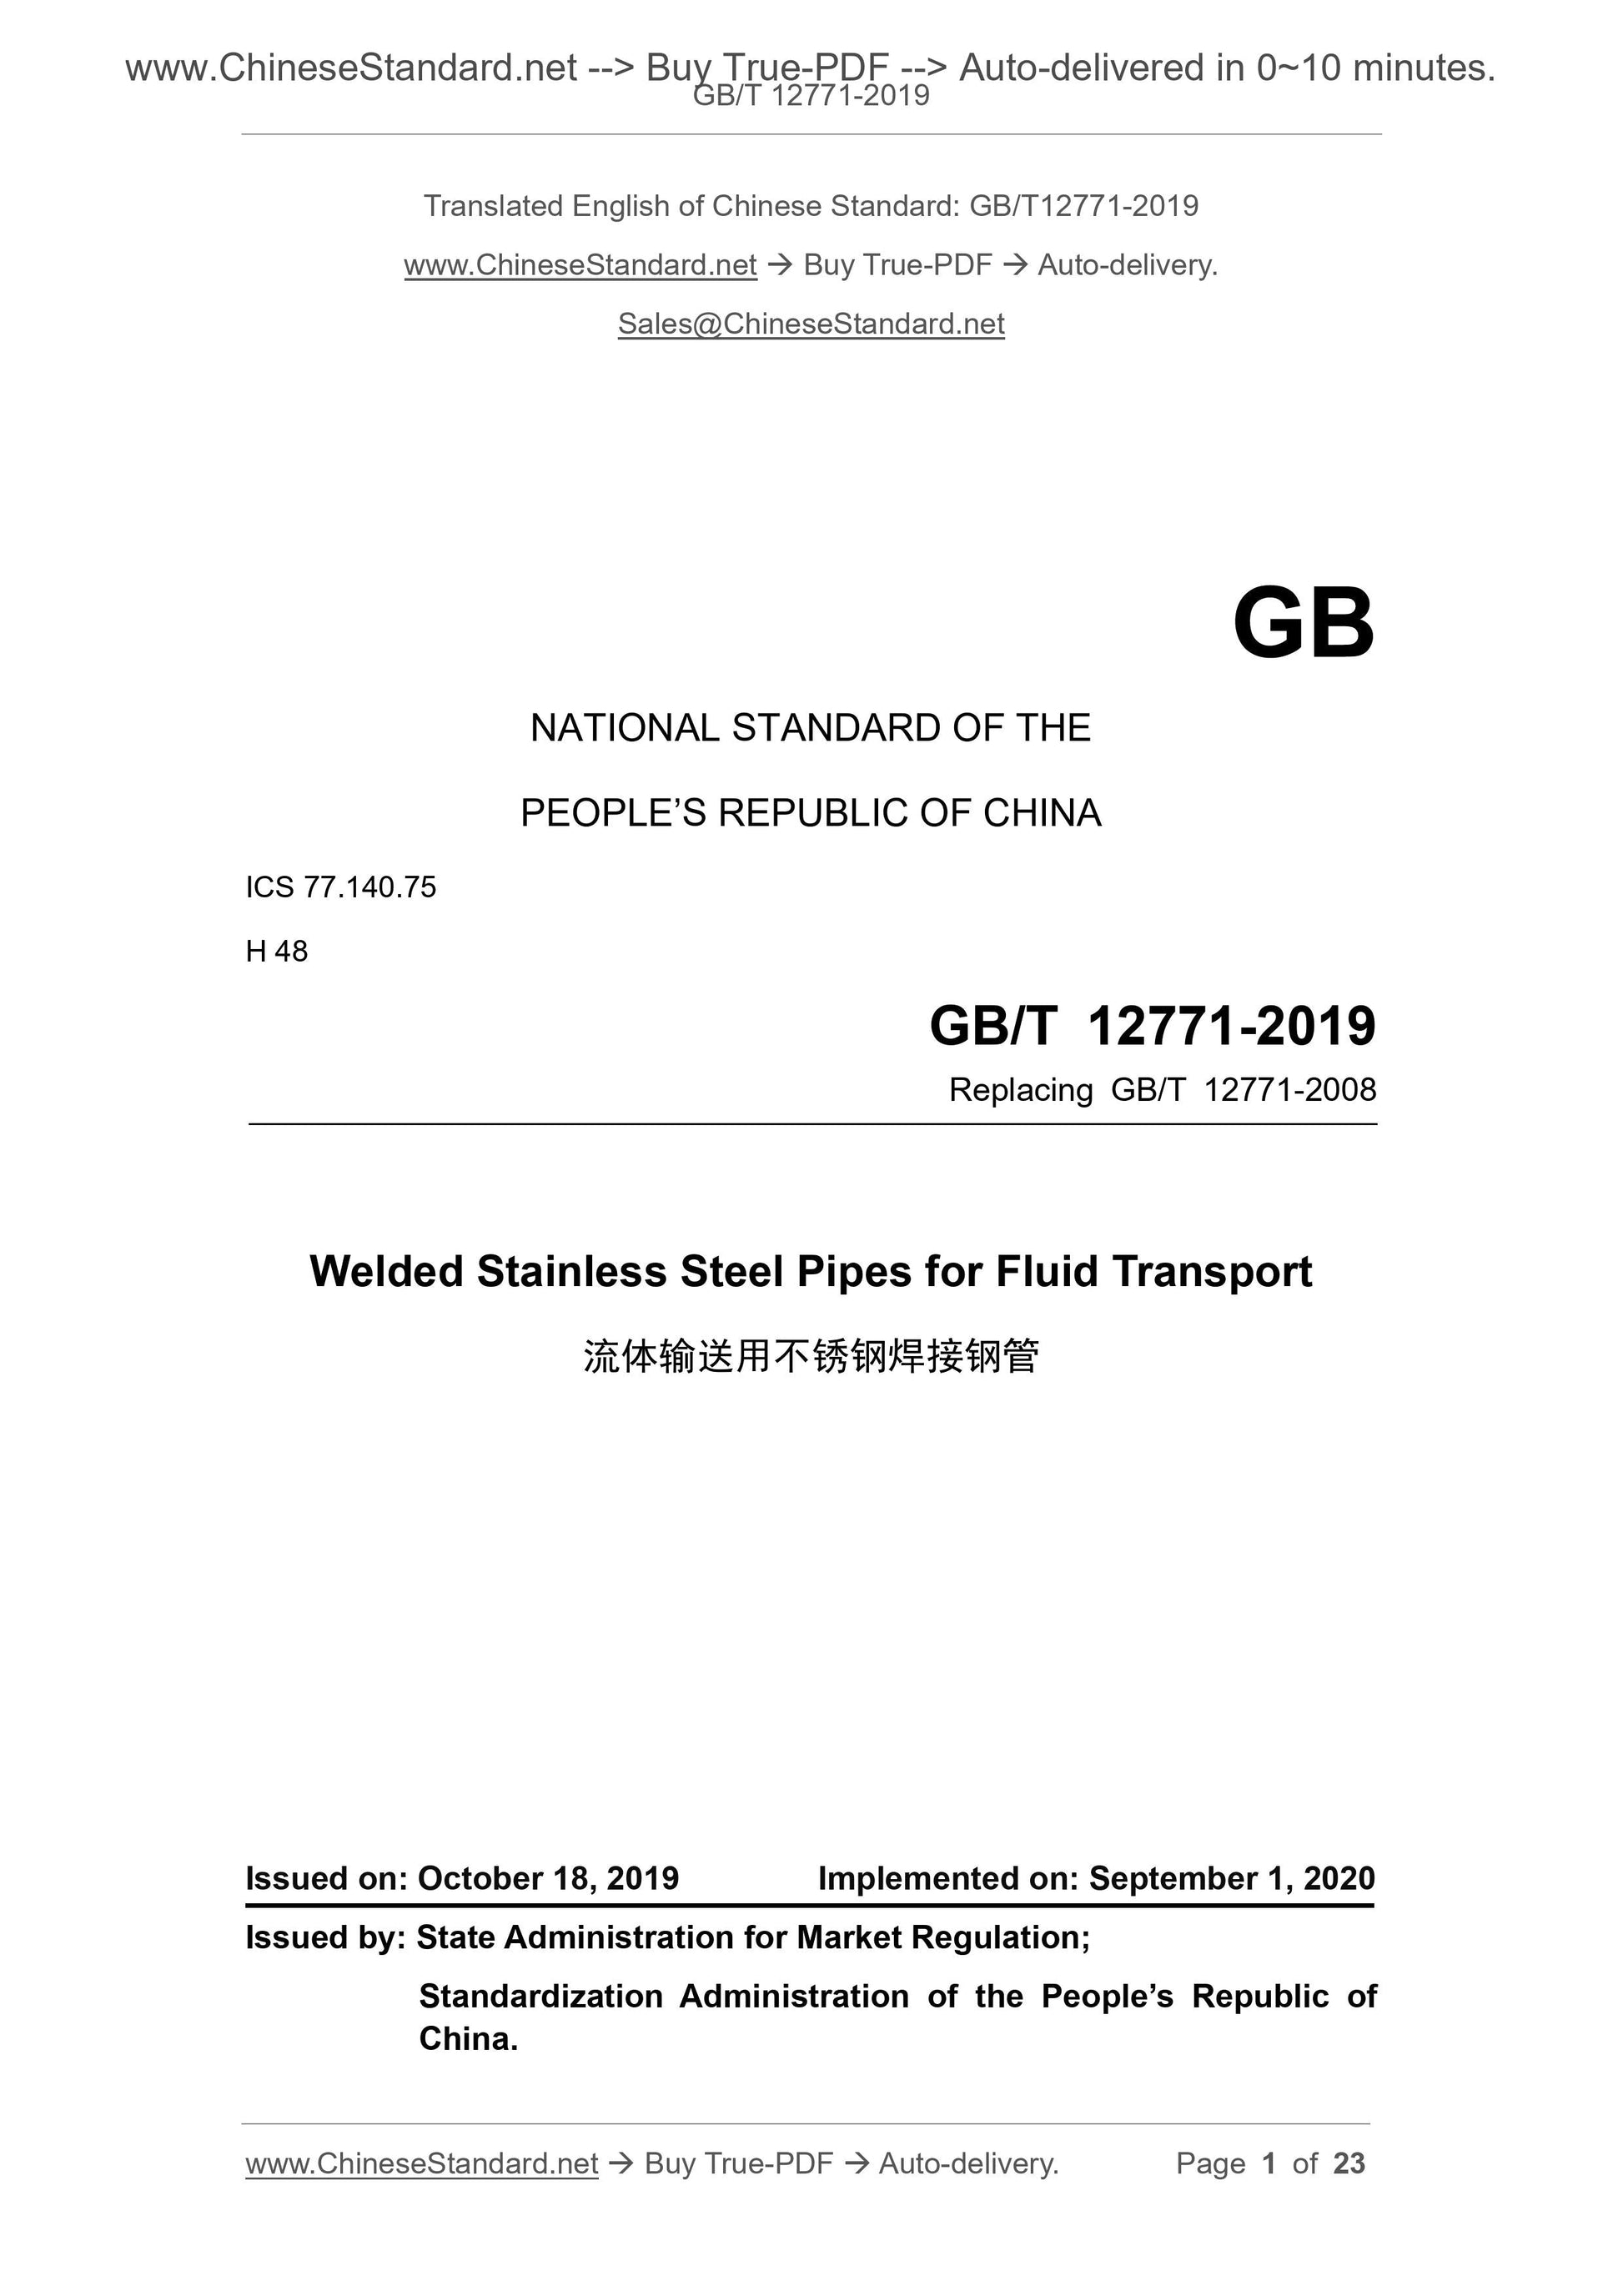 GB/T 12771-2019 Page 1